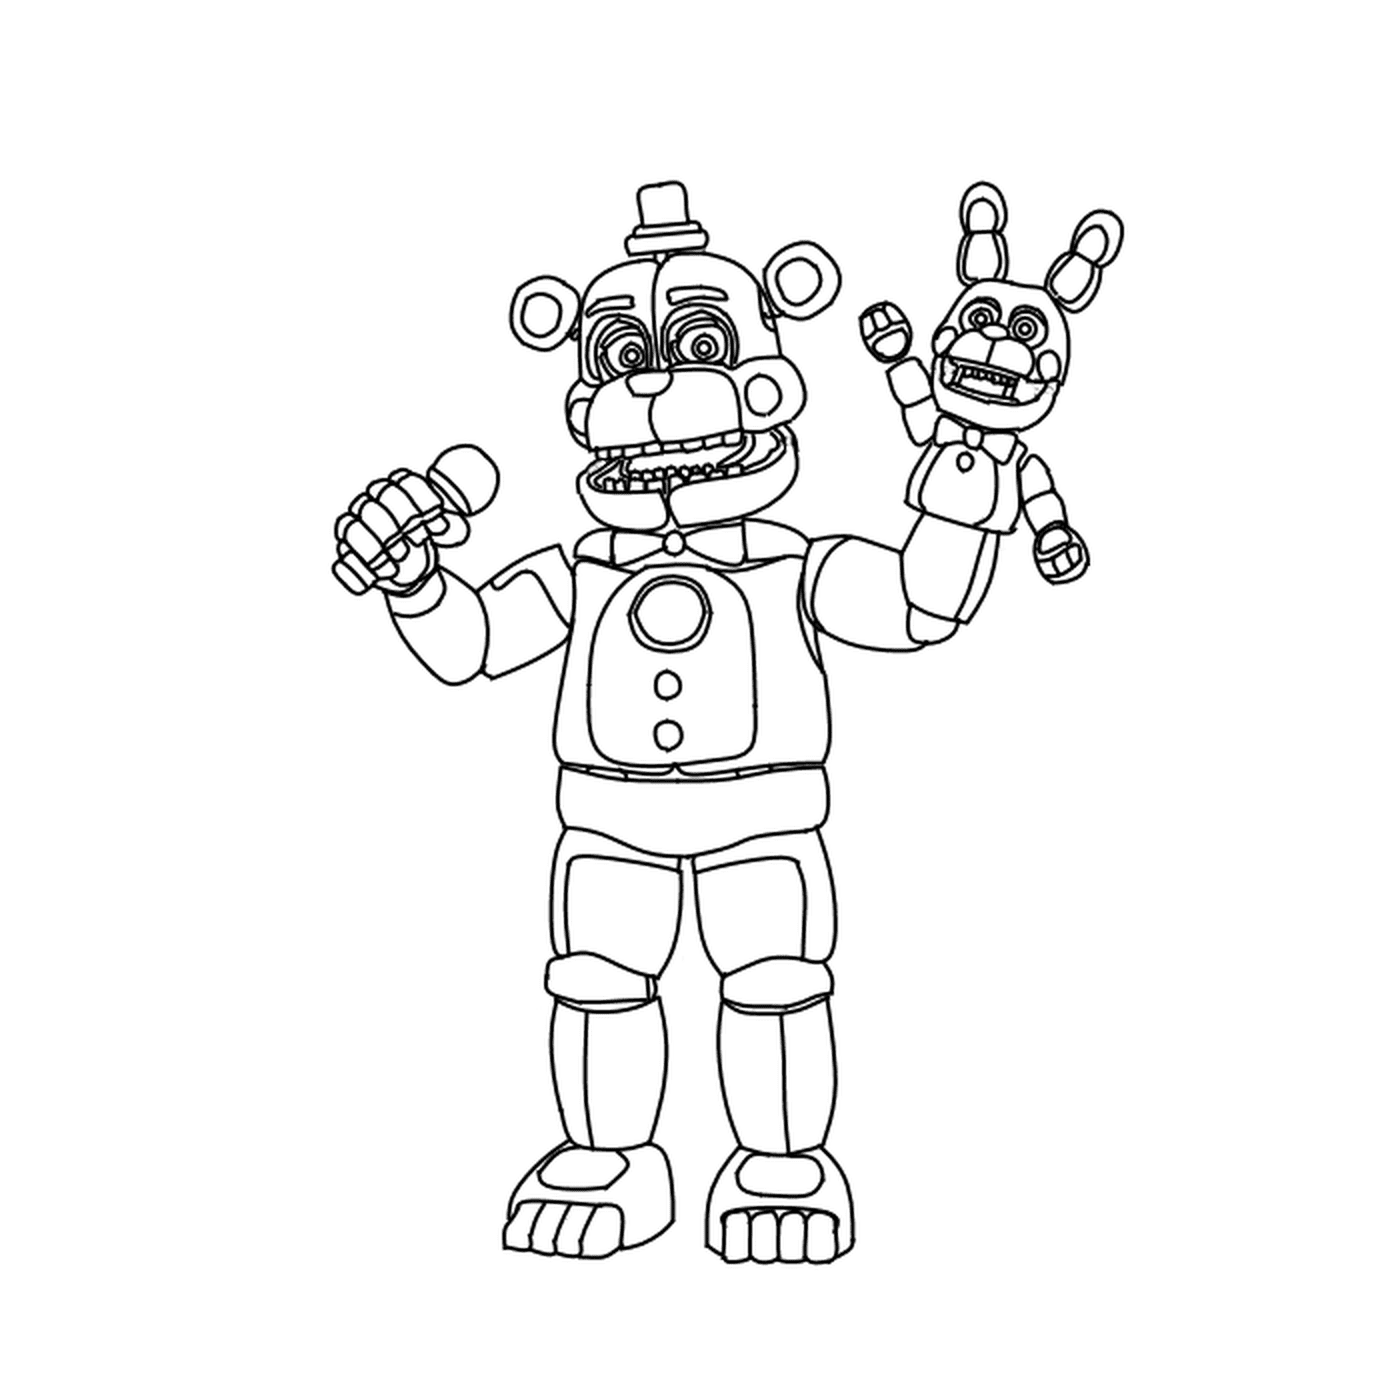  A toy version of Freddy from Five Nights at Freddy's 